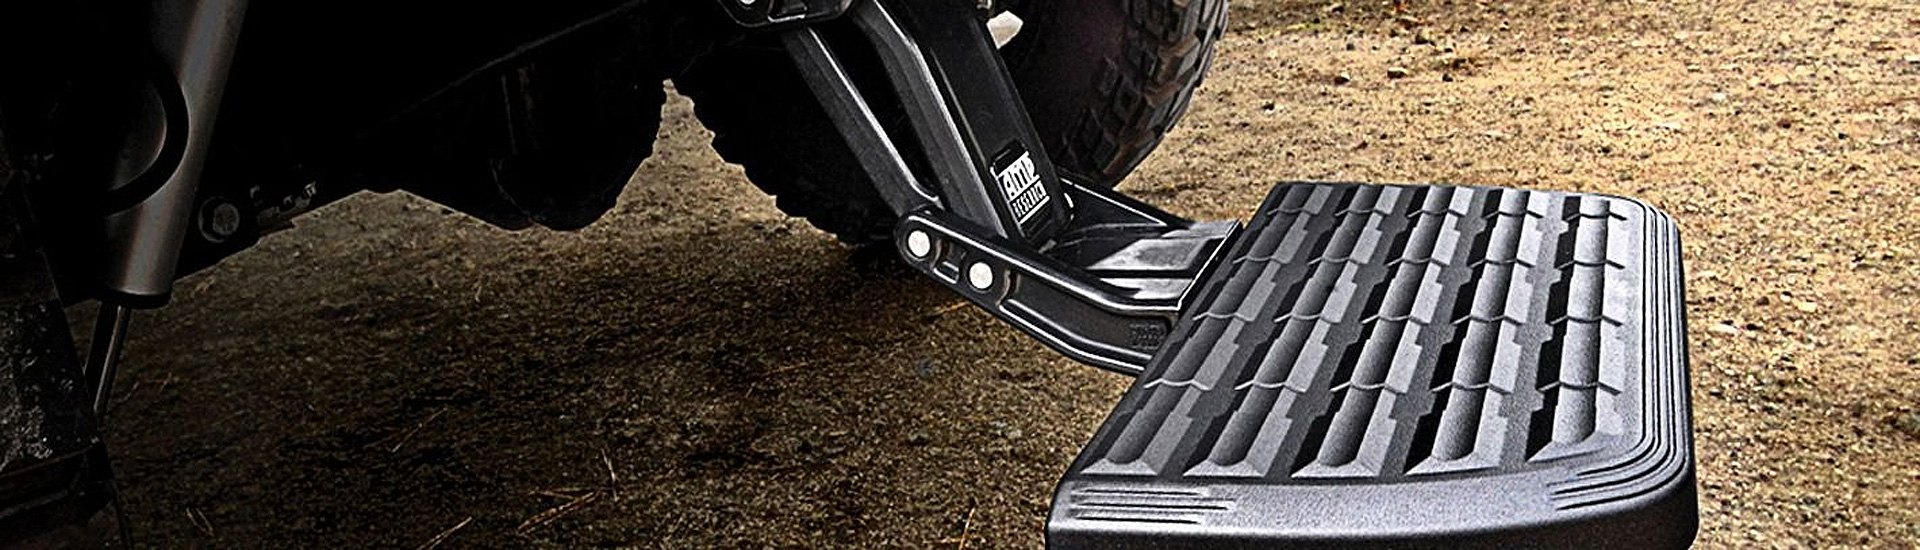 Folding Steps Make It Easier To Reach Your Pickup Bed 